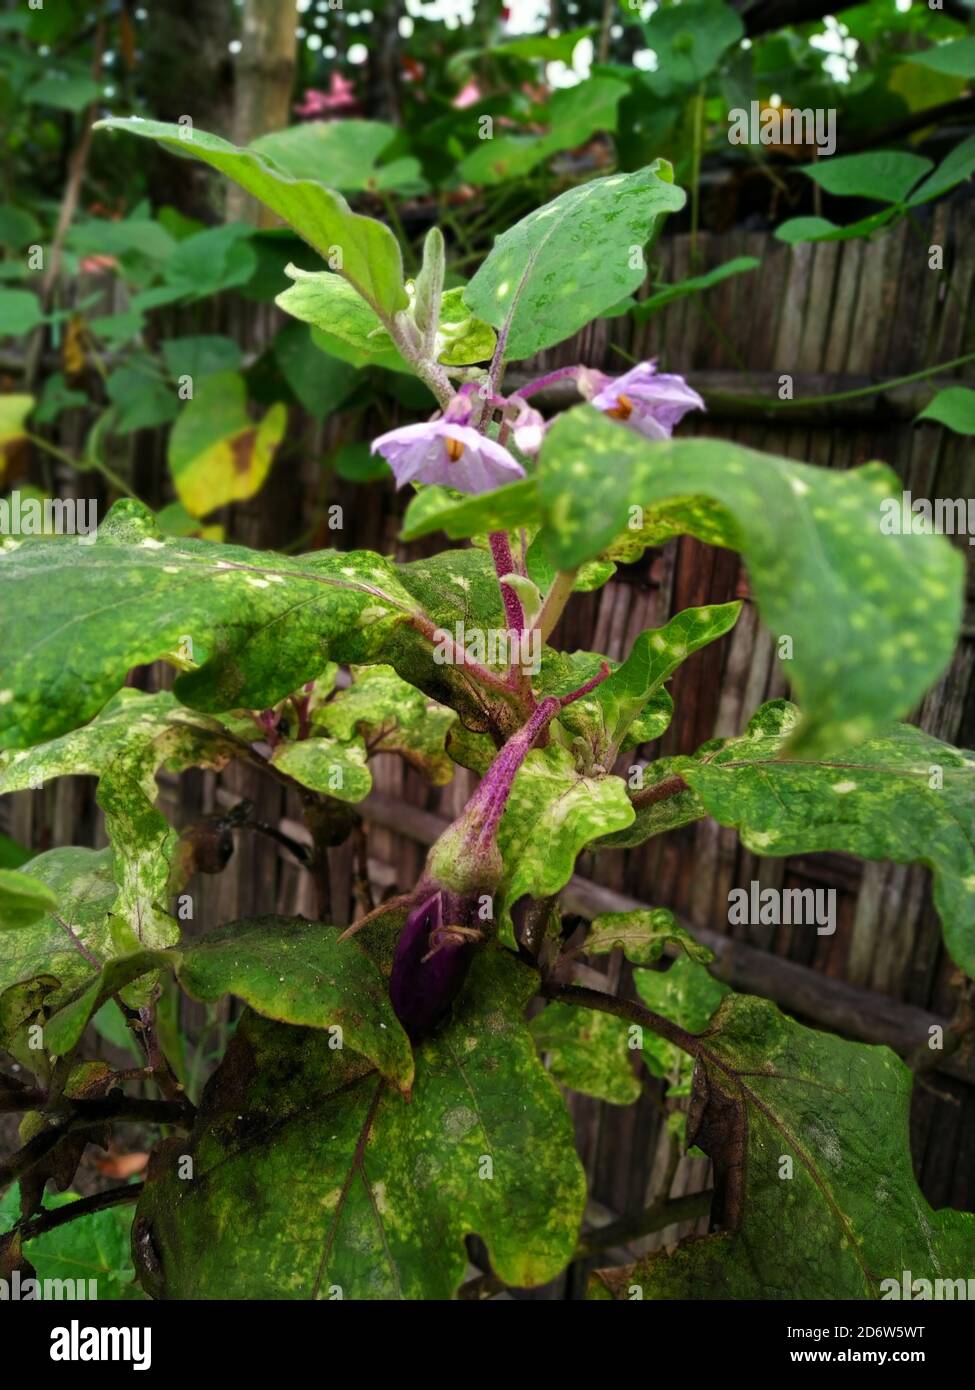 Infected brinjal plant. Plant is also known as eggplant. Stock Photo